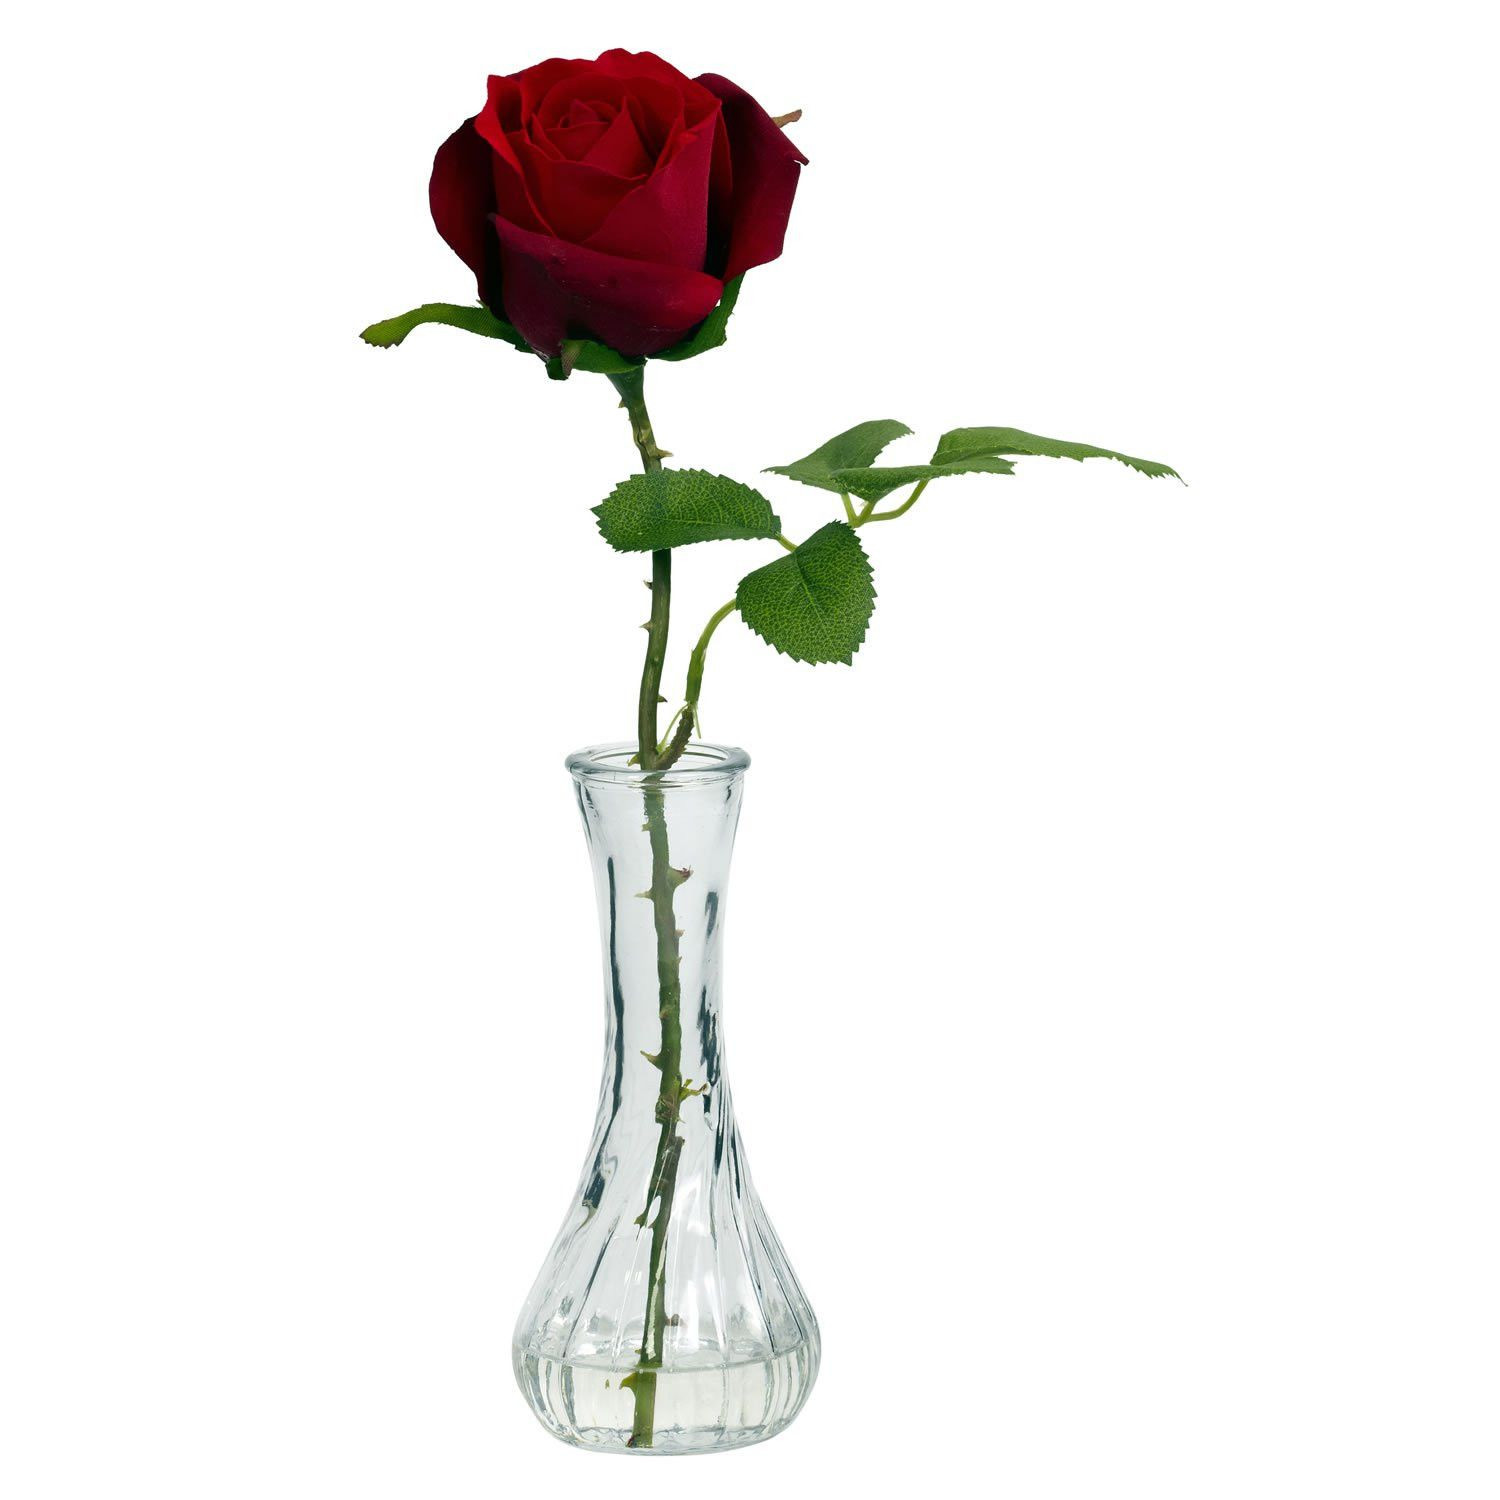 16 Lovable Vase with Roses 2024 free download vase with roses of pictures of roses in a vase inspirational vase redh vases single for pictures of roses in a vase inspirational vase redh vases single rose in vasei 0d a